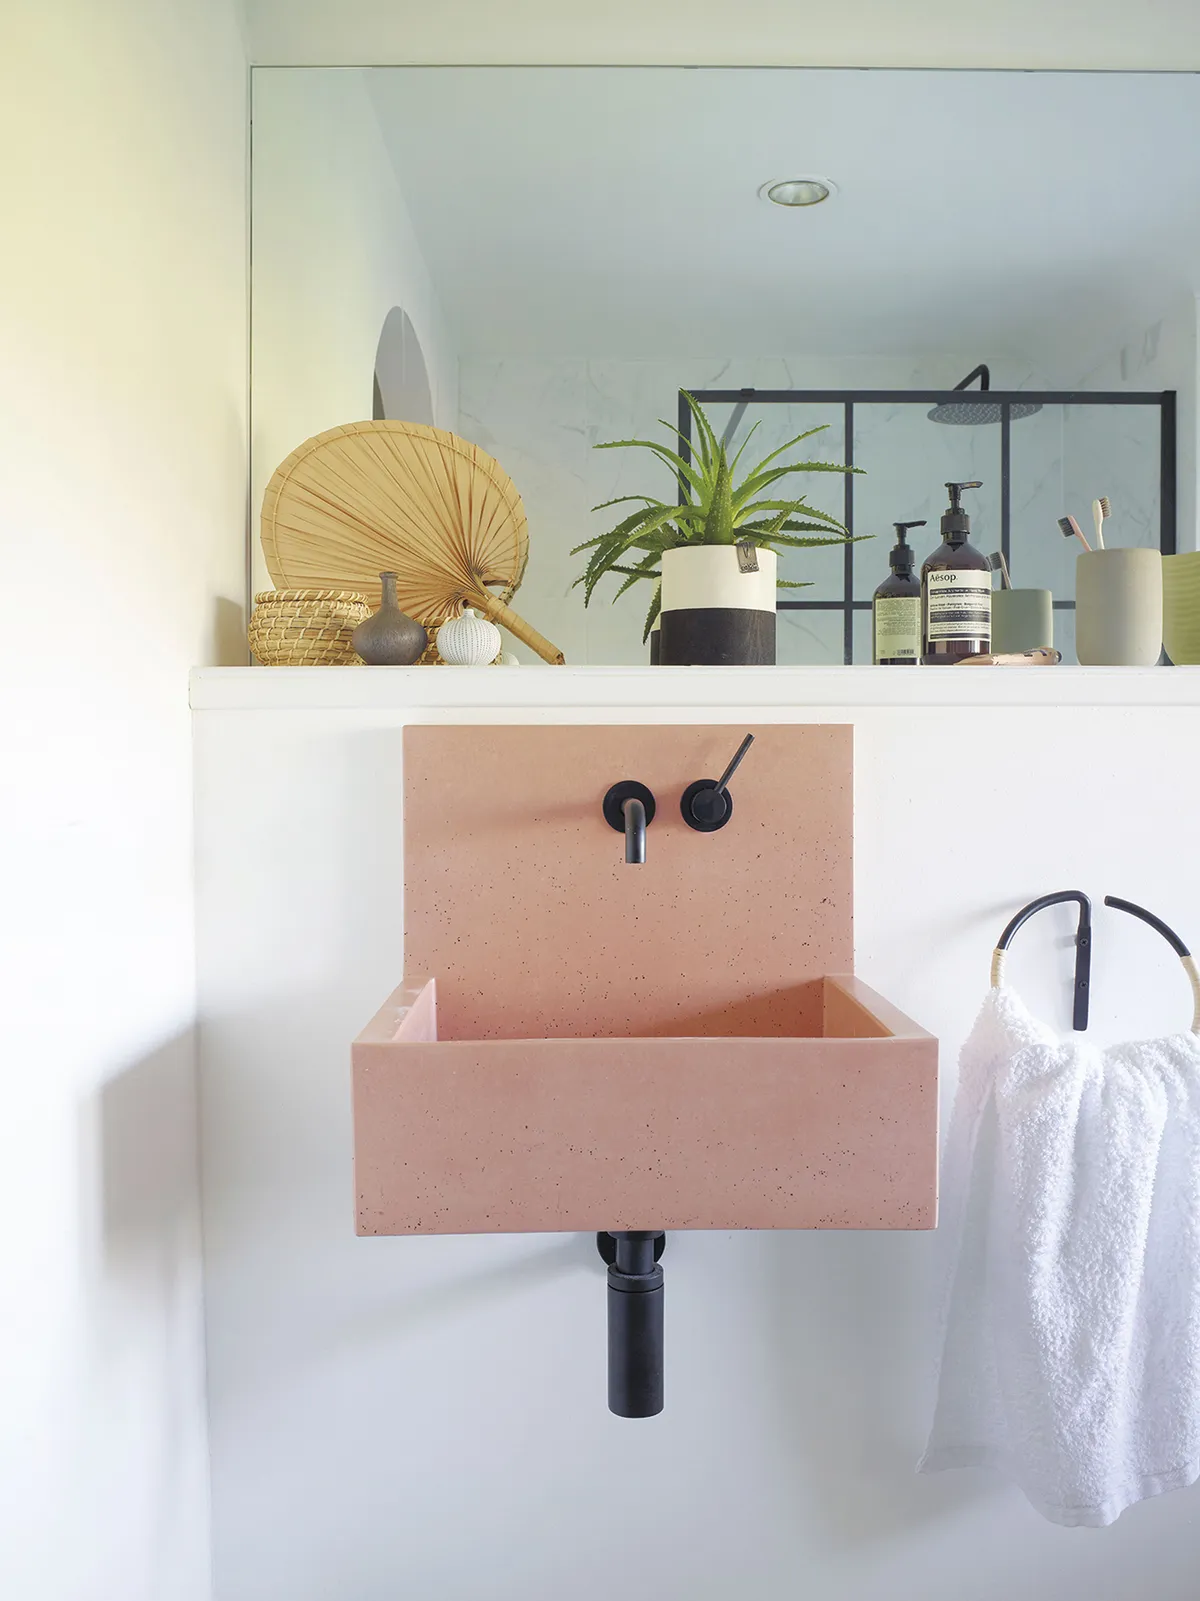 The design of Hayley’s en suite centres on her pink Kast basin, with its clean lines and Scandi-inspired design